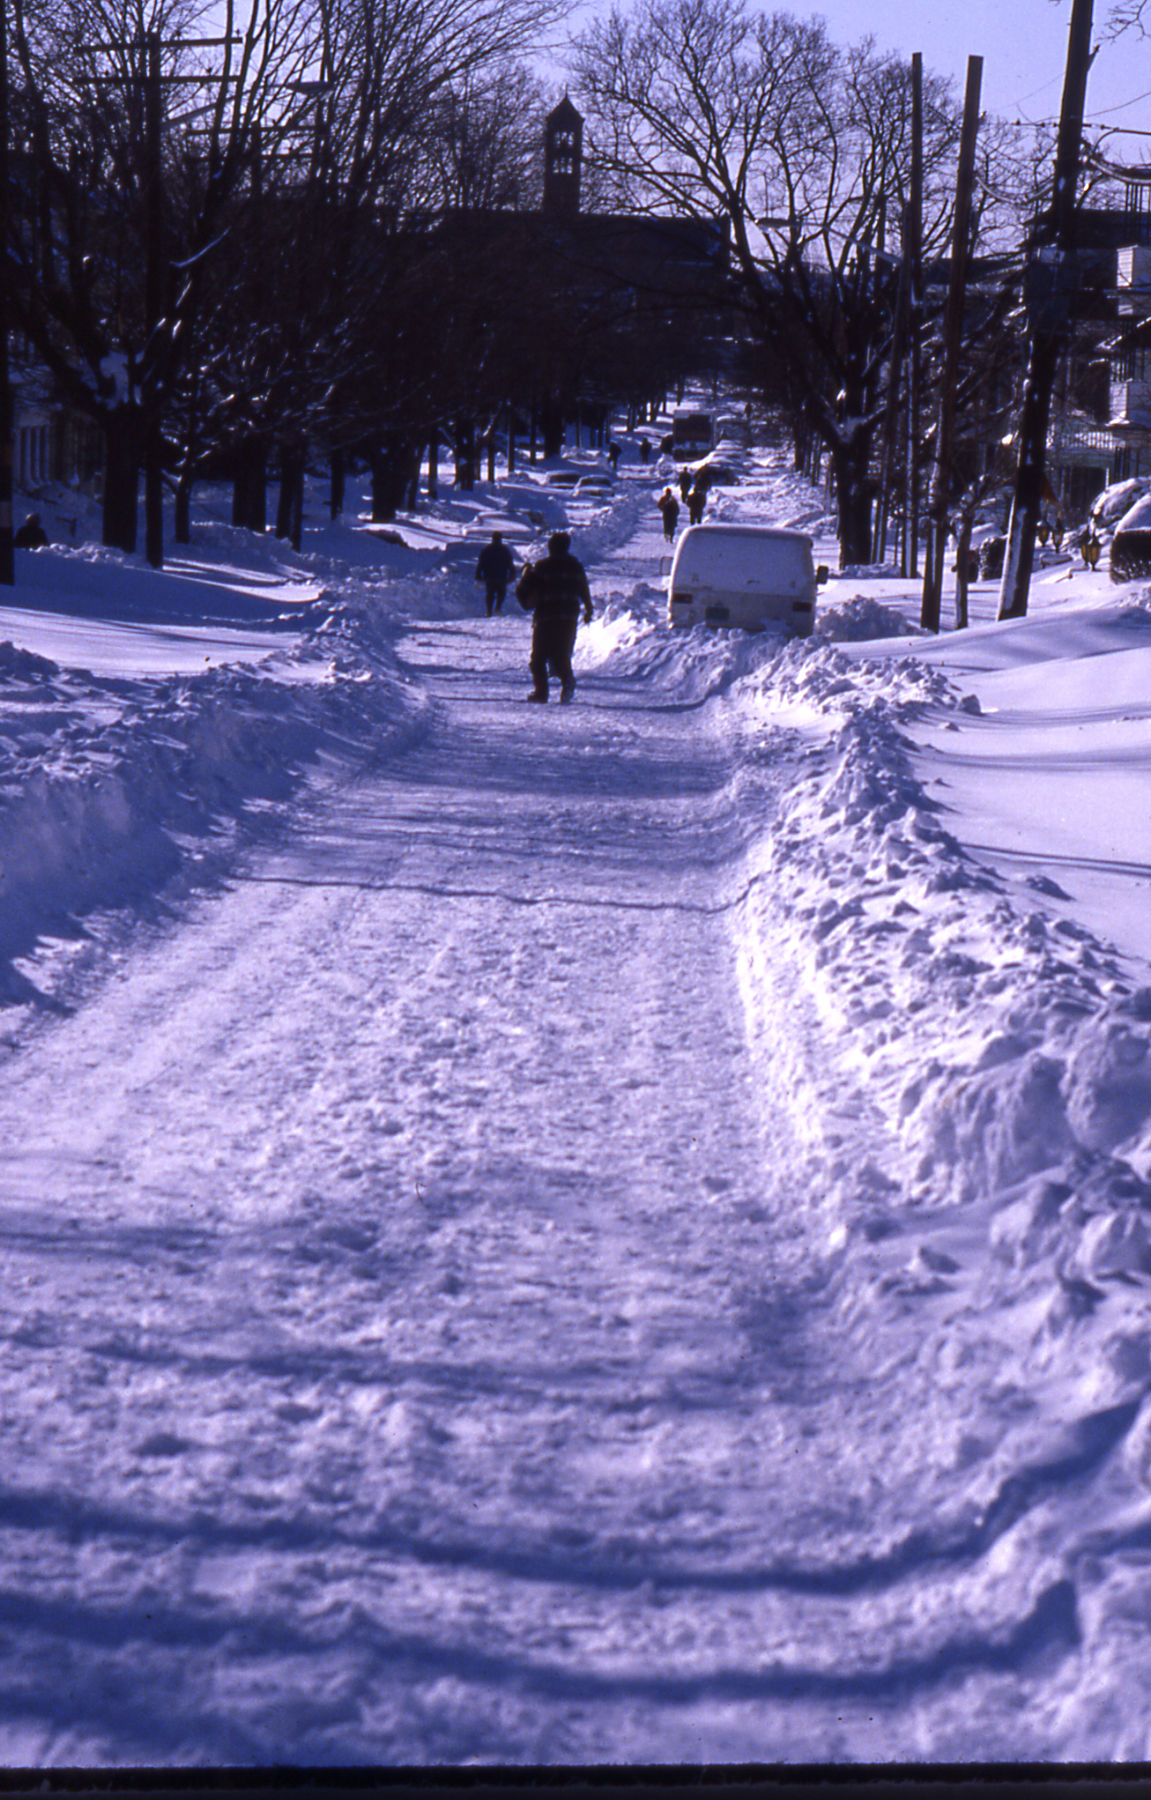 BLIZZARD OF 78